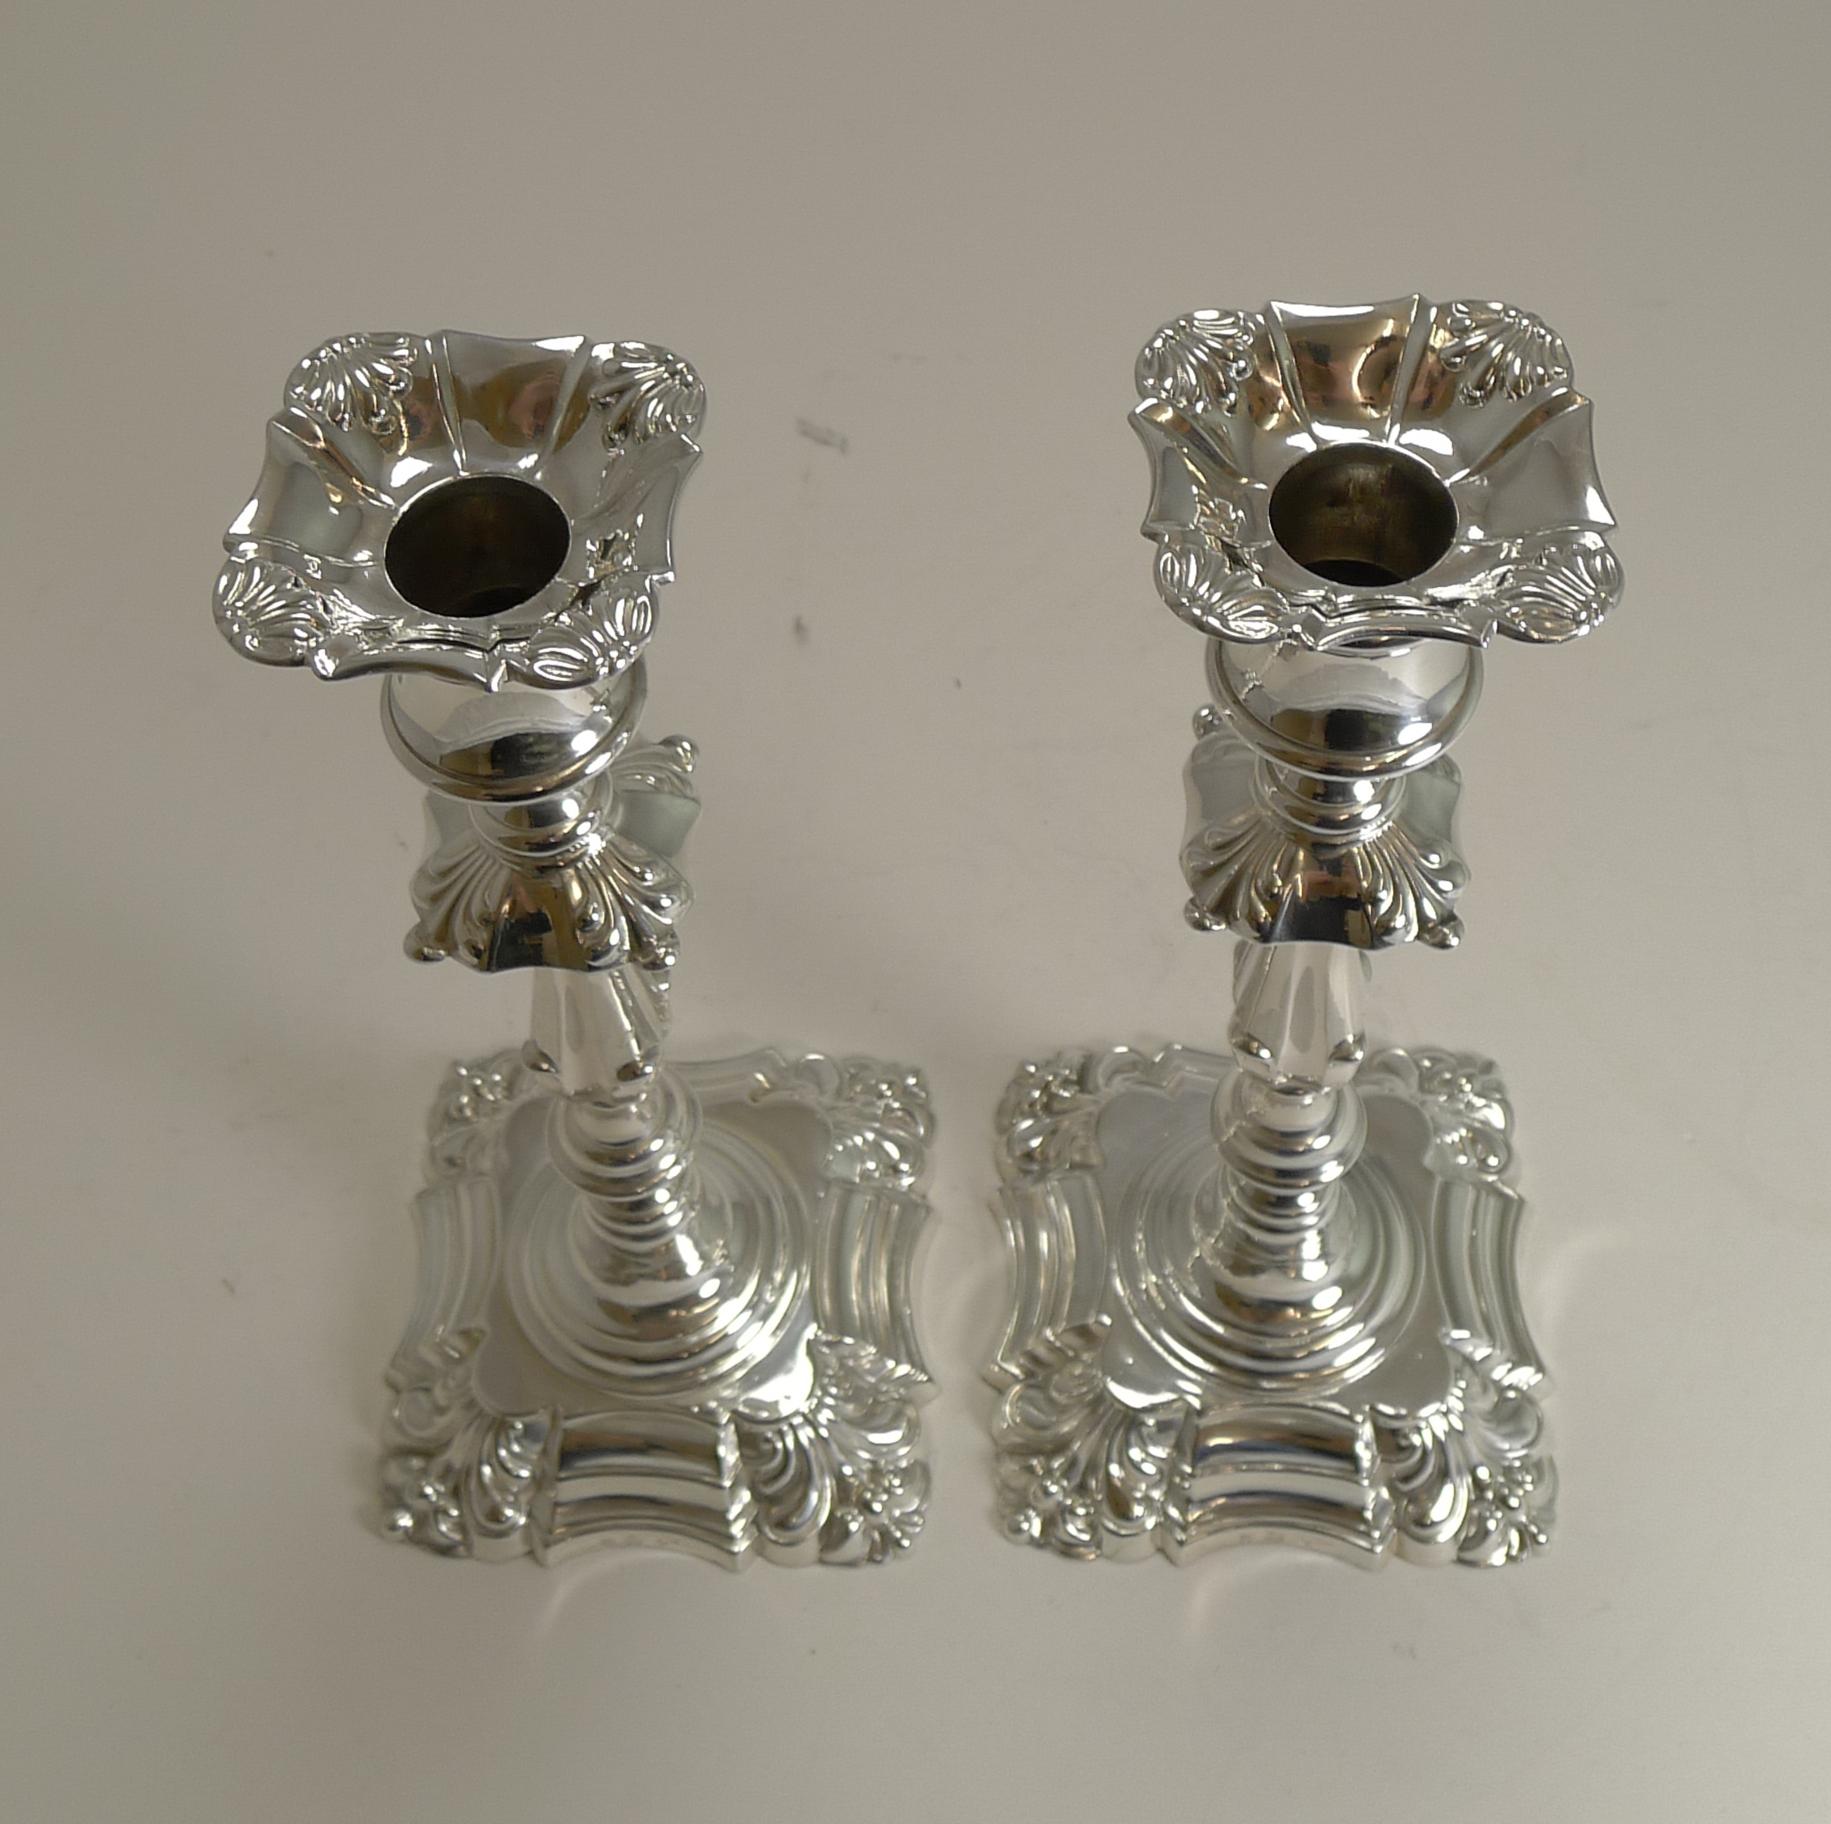 Late Victorian Pair of Antique English Candlesticks by Elkington, 1853